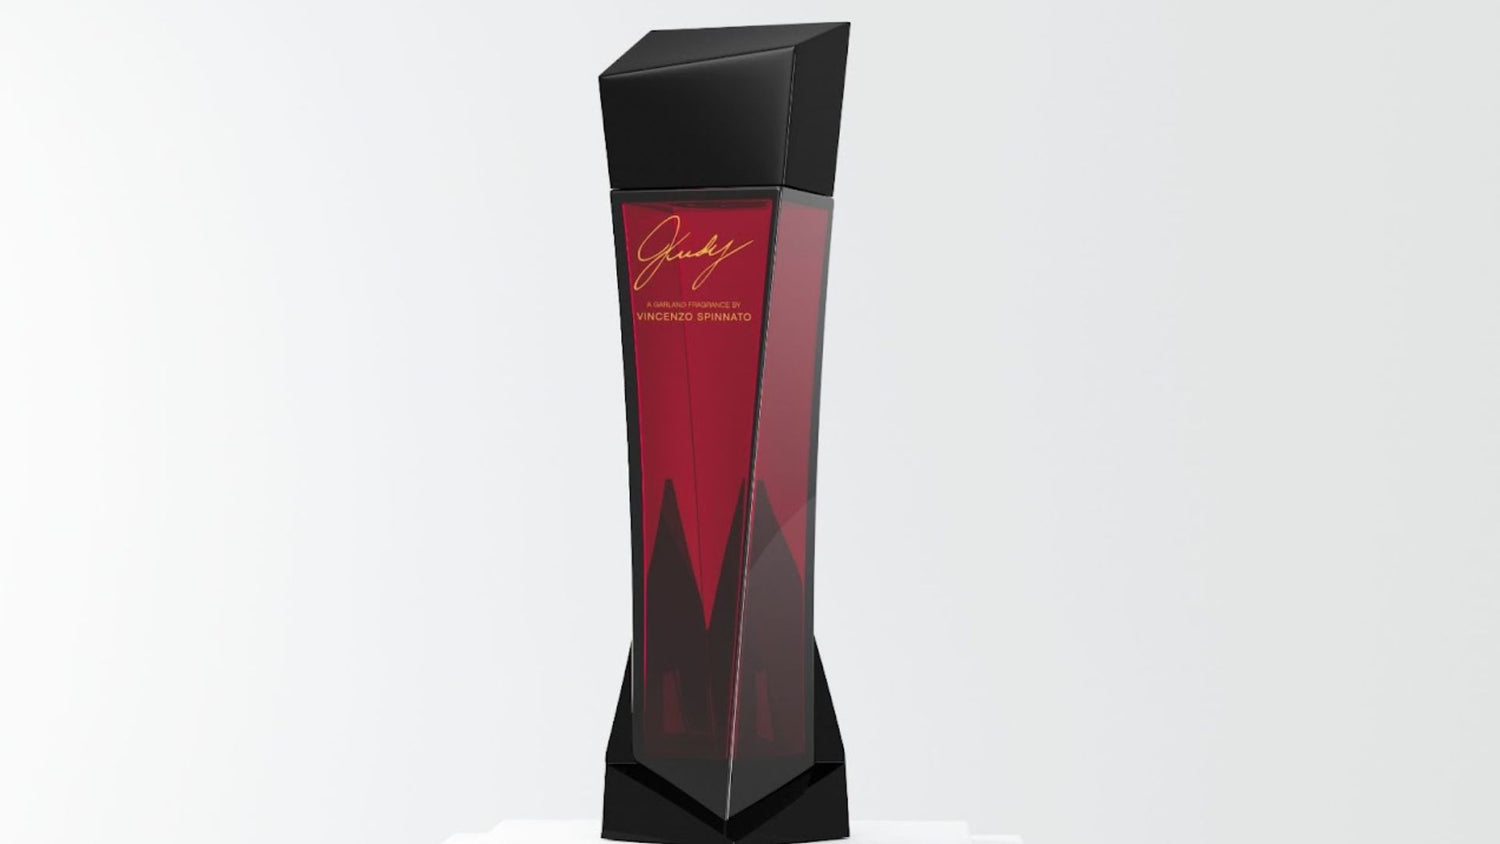 review, photos, ingredients, trends, fragrance, perfume, 2022, 2023, judy, a garland fragrance, vincenzo spinnato, oriental, amber family, rich florals, spicy gourmands